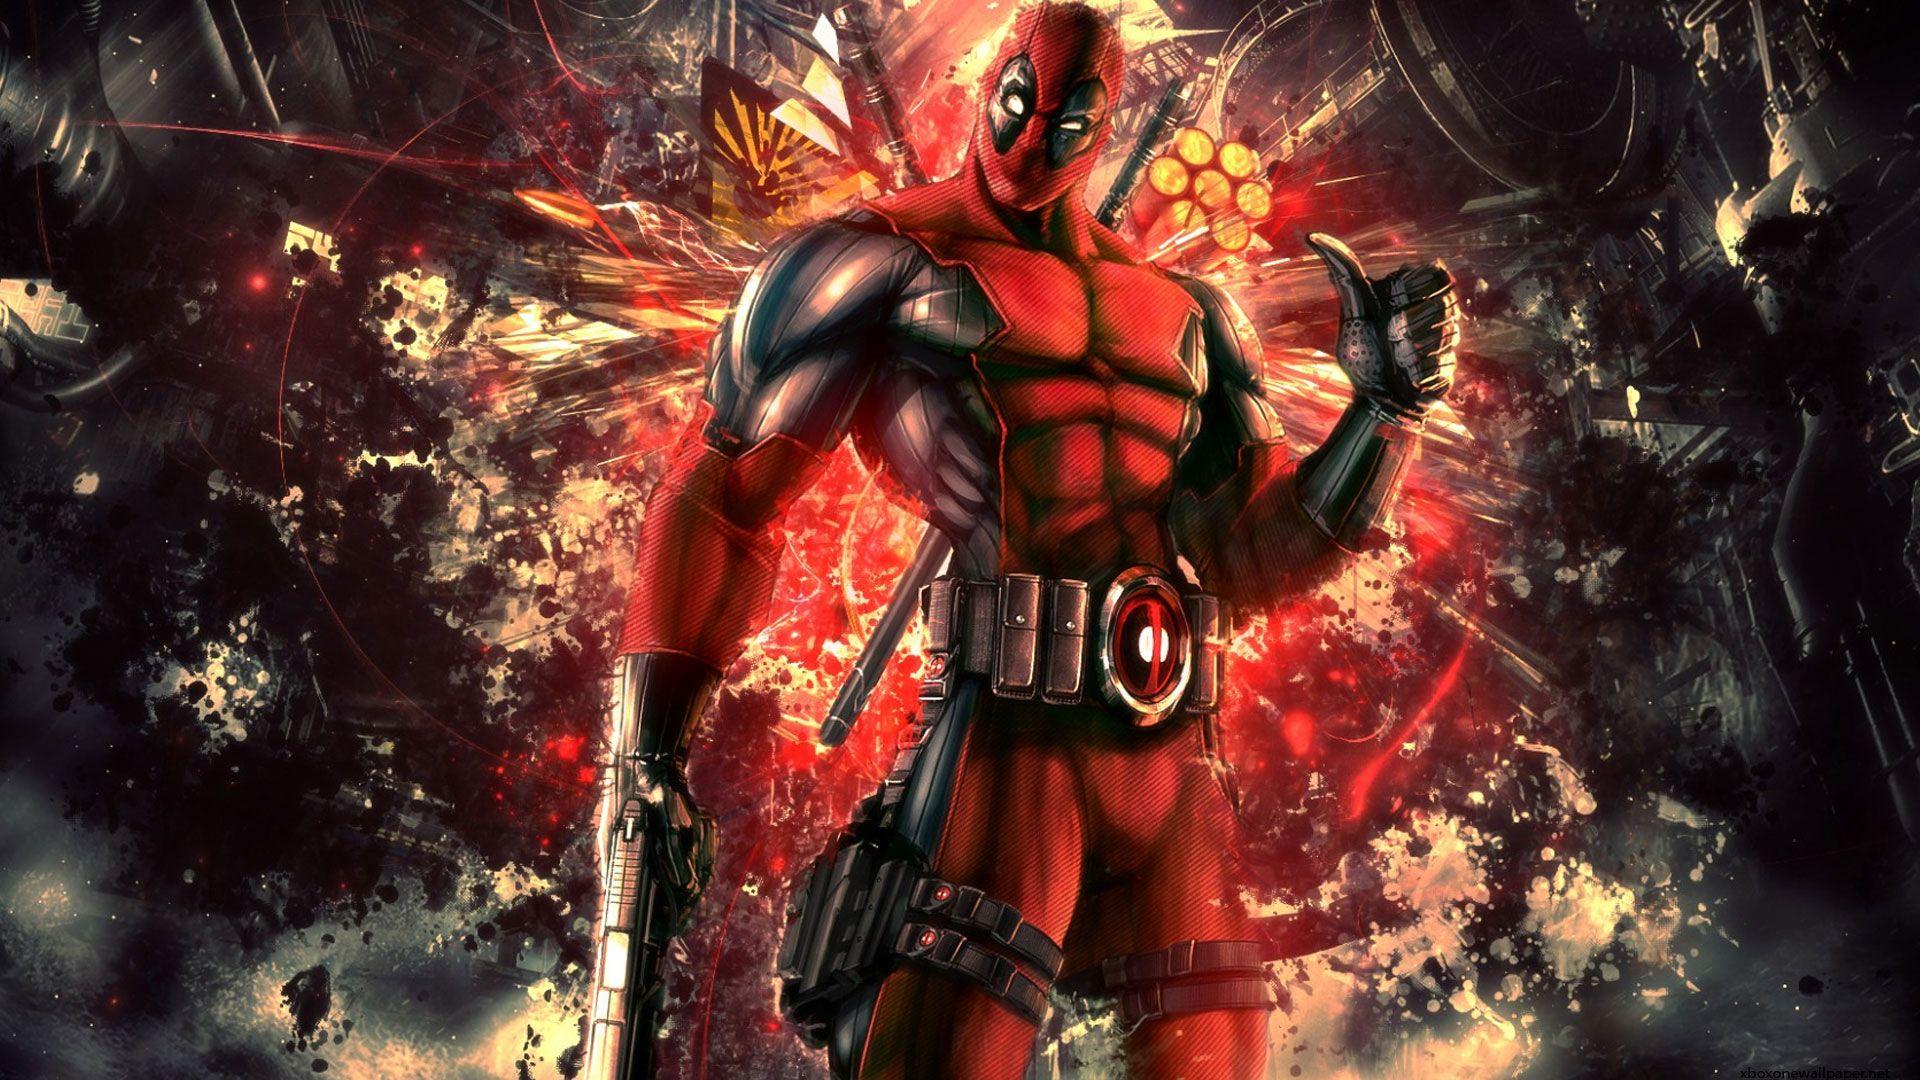 Dead Pool Xbox One Wallpapers - Top Free Dead Pool Xbox One Backgrounds